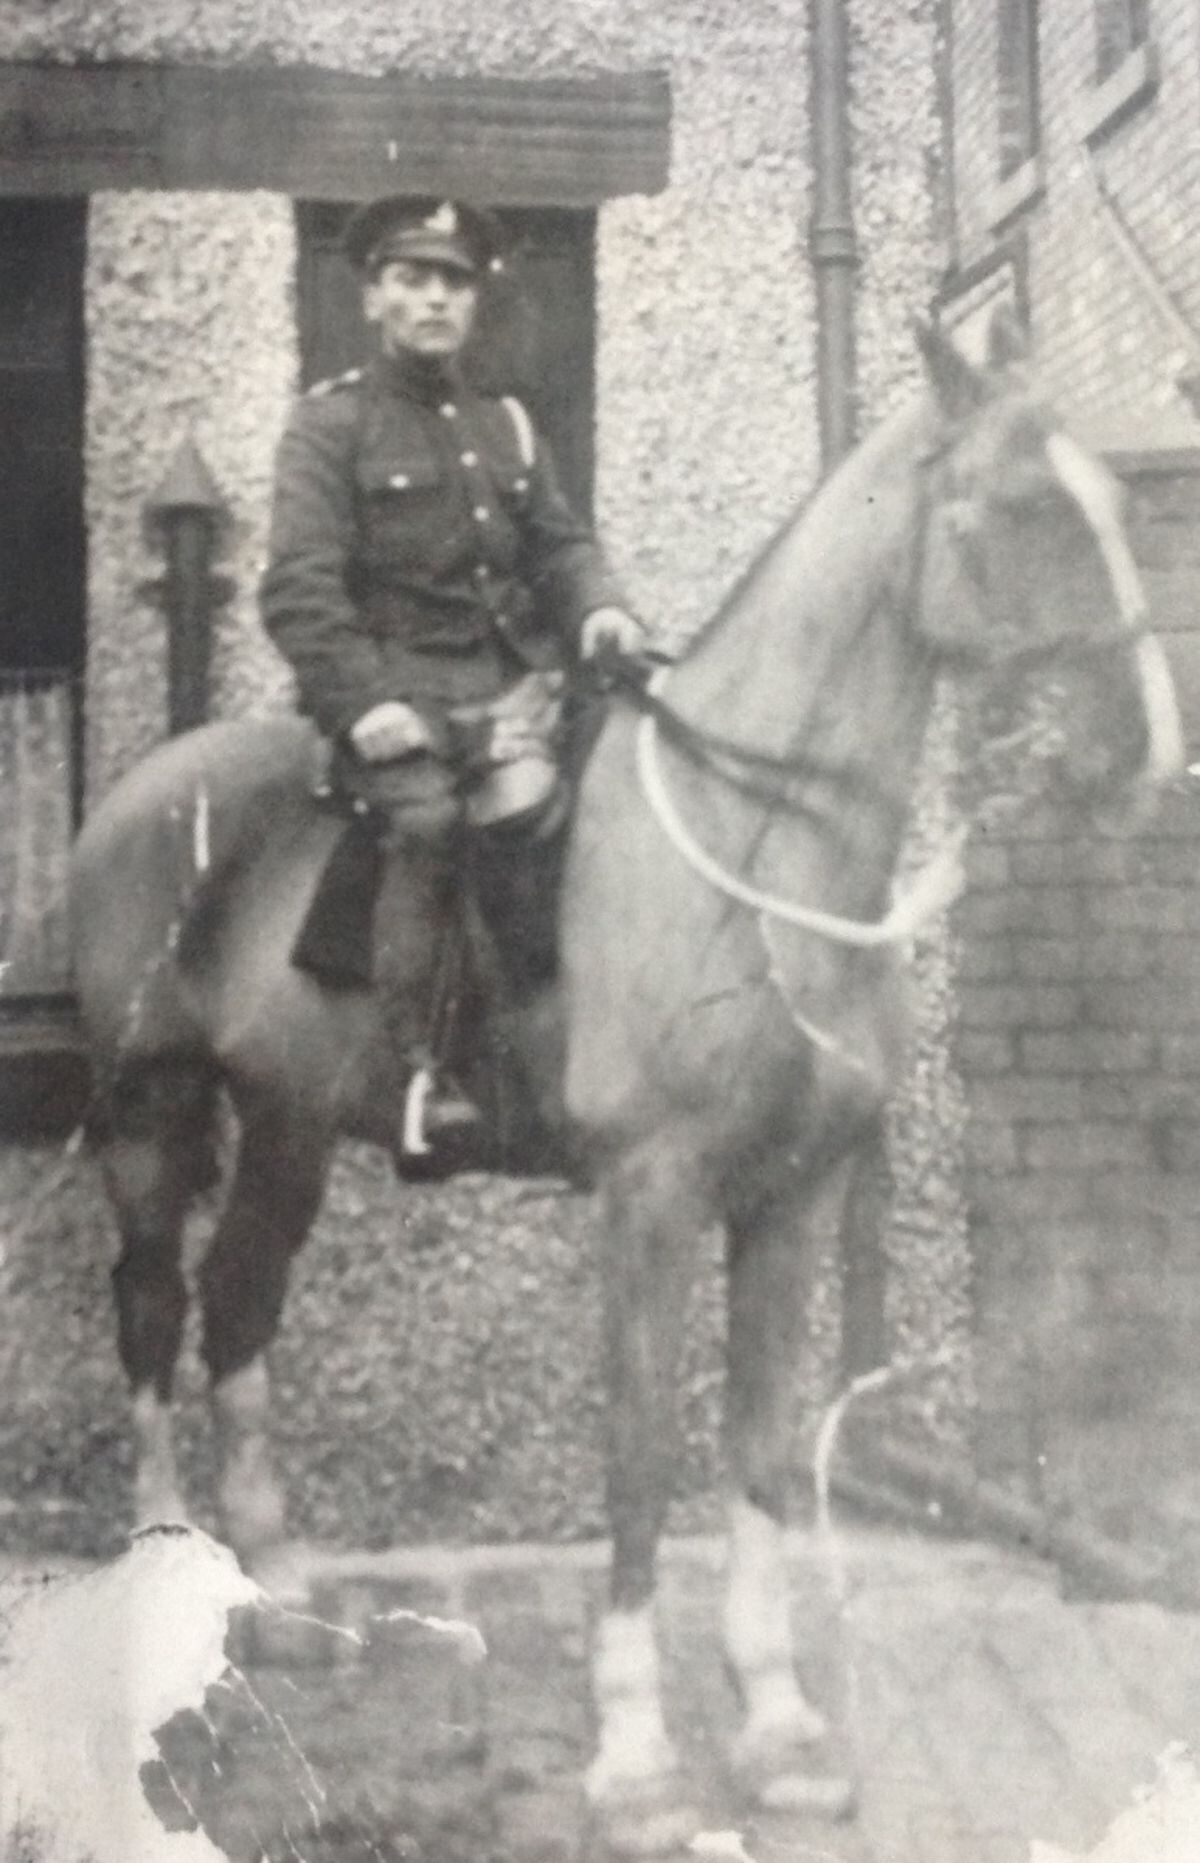 Photograph courtesy of Jean Parker. In photo: James Charmer 2111/690294 Driver Royal Field Artillery